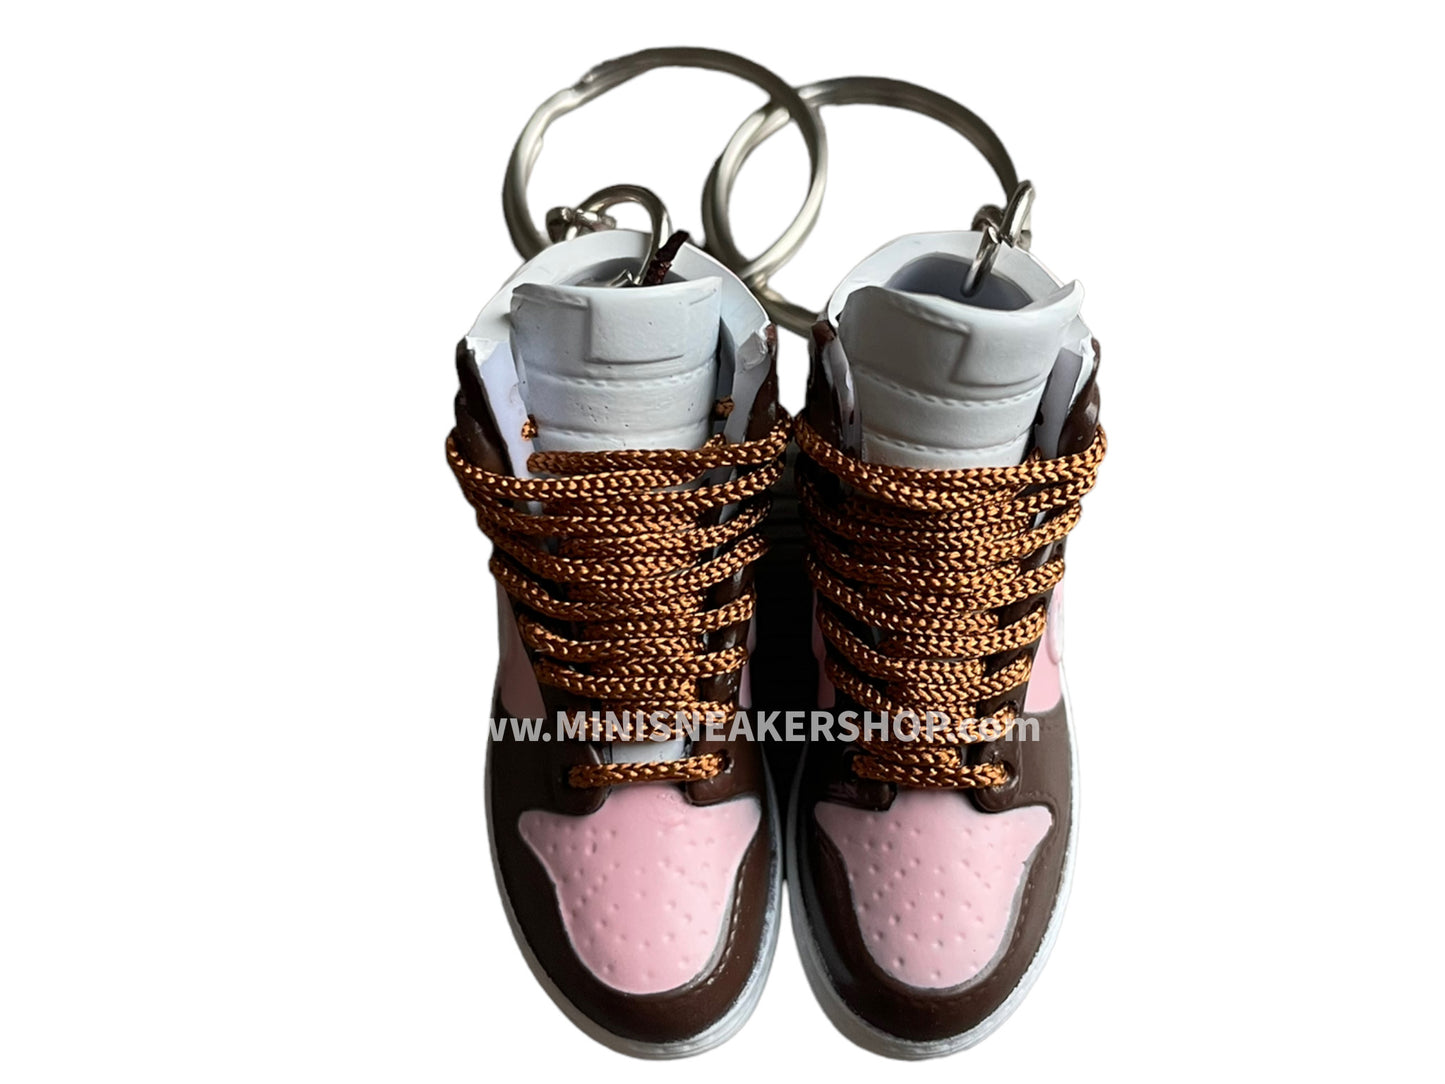 Mini sneaker keychain 3D Dunk - Brown and Pink